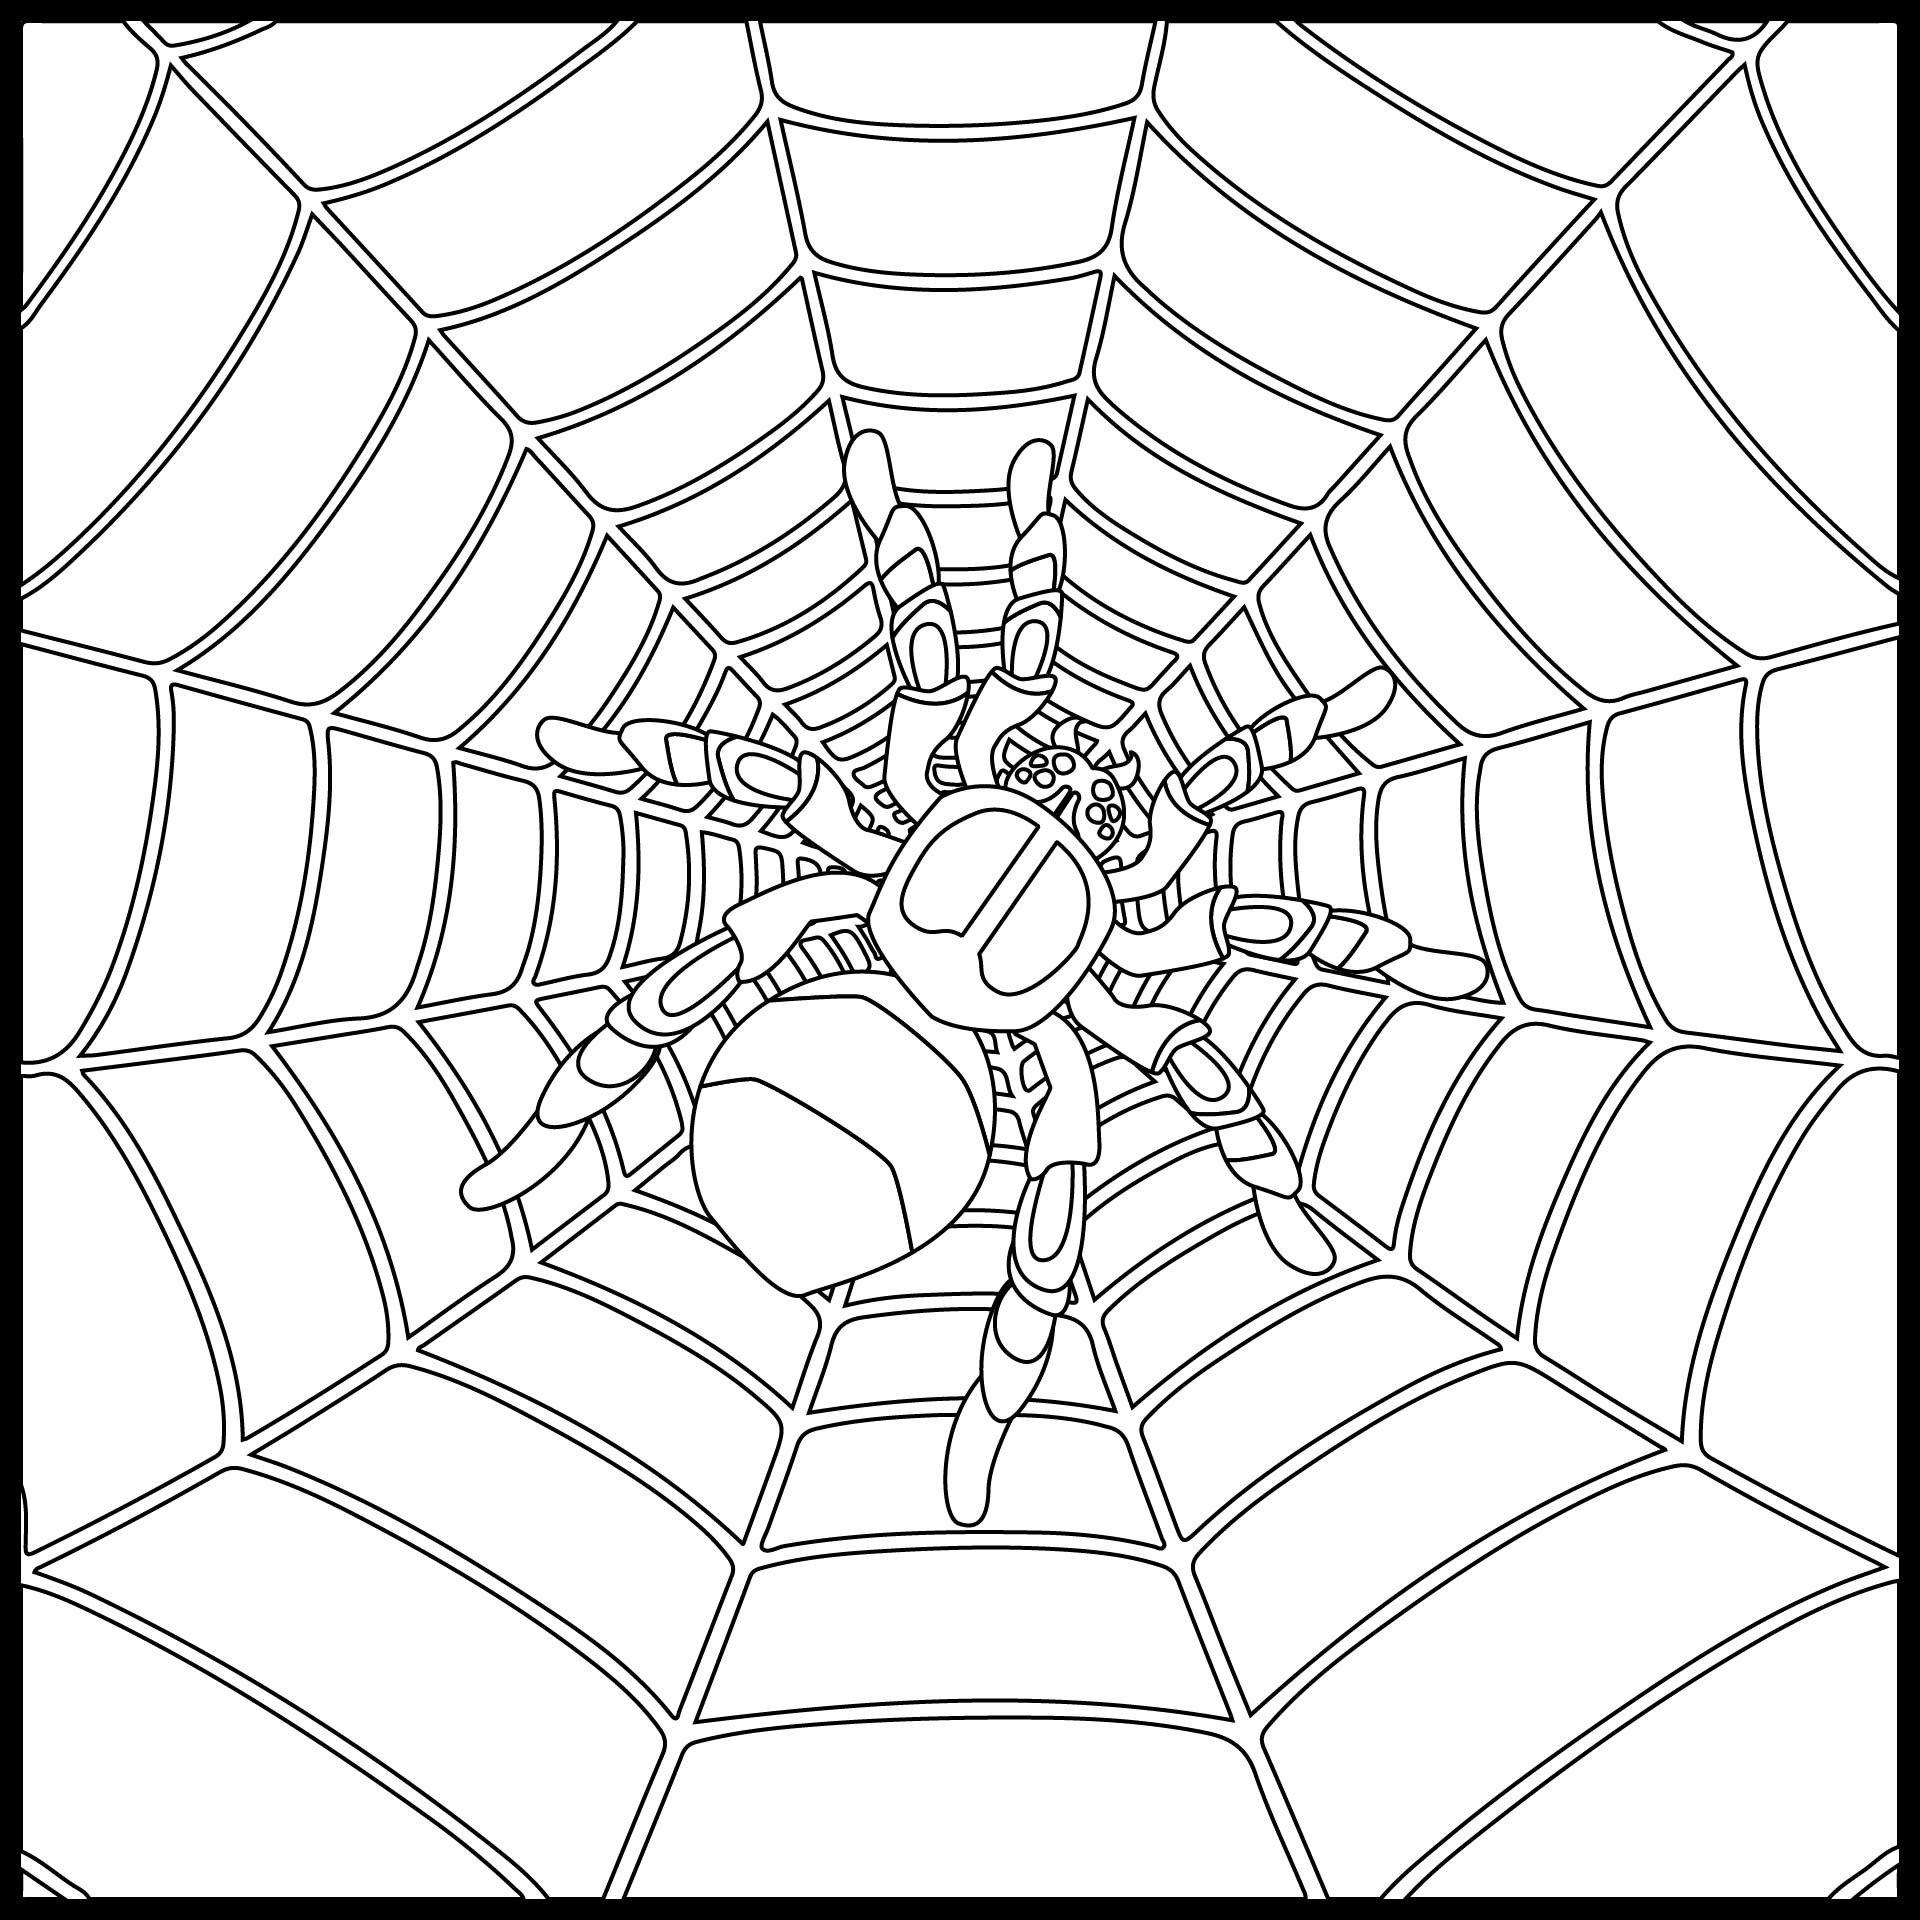 Printable Halloween Spider Web Coloring Page For Kids